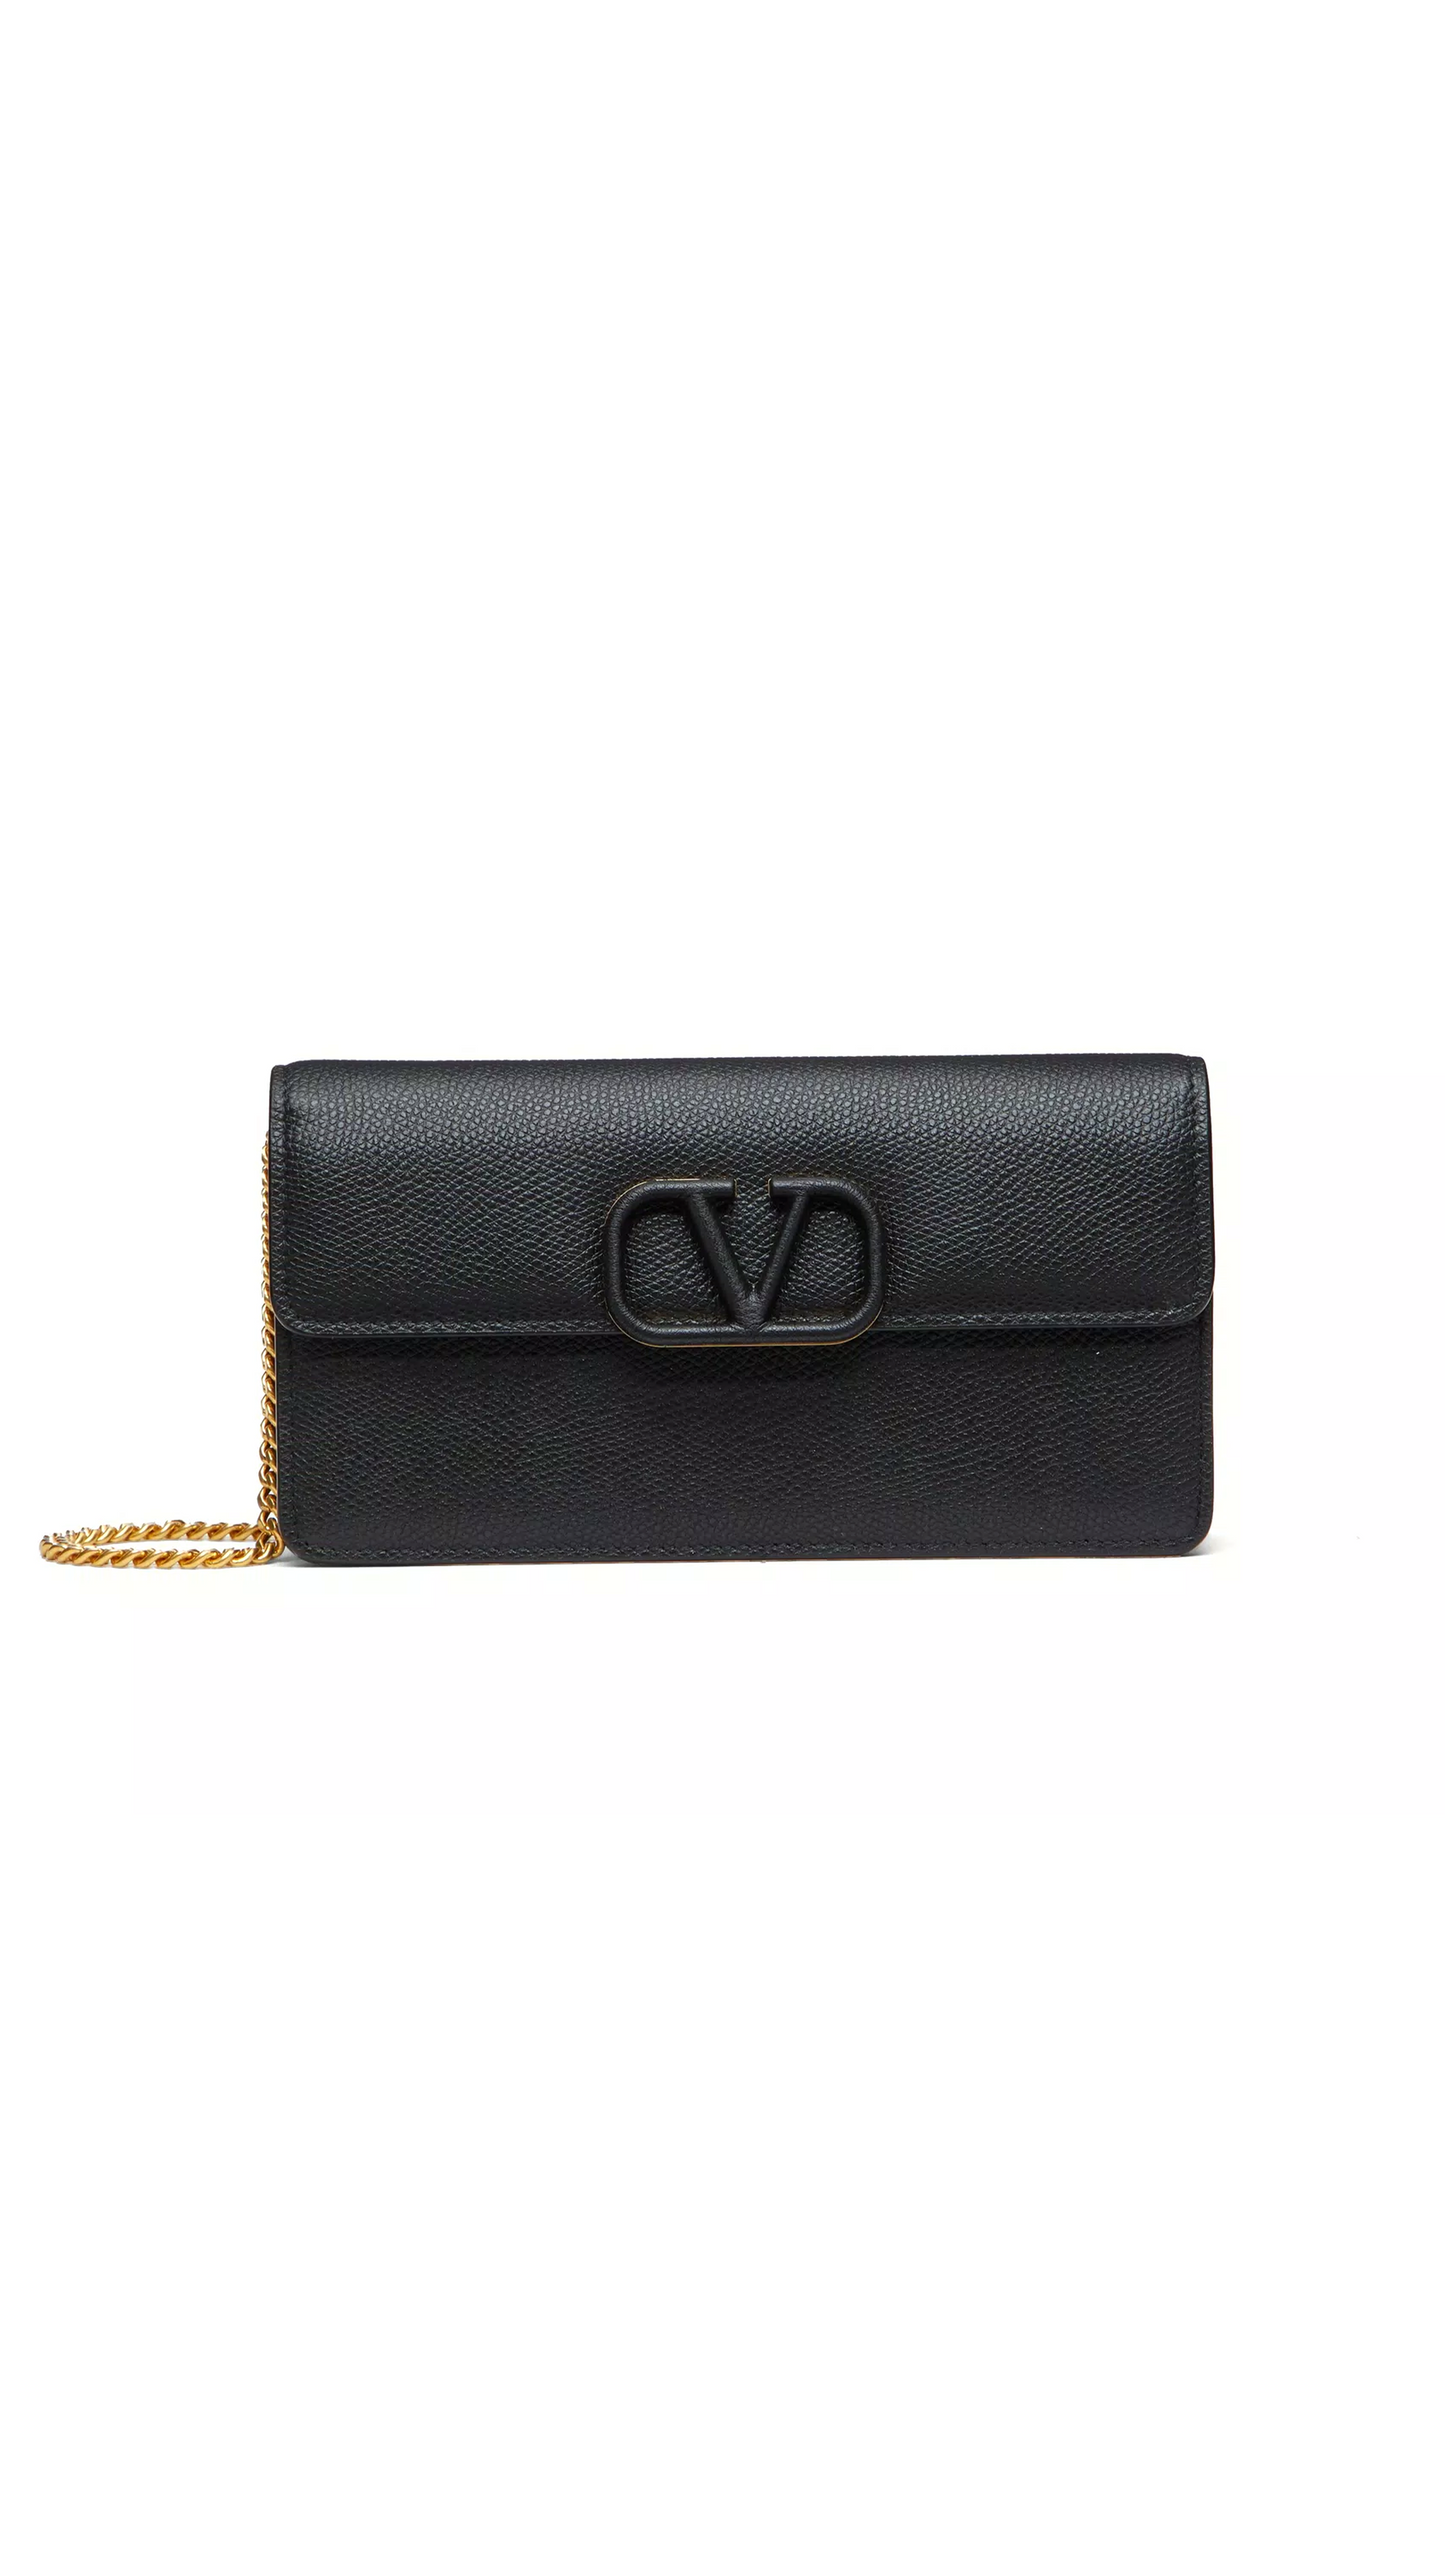 Vlogo Signature Grainy Calfskin Wallet With Chain - Black